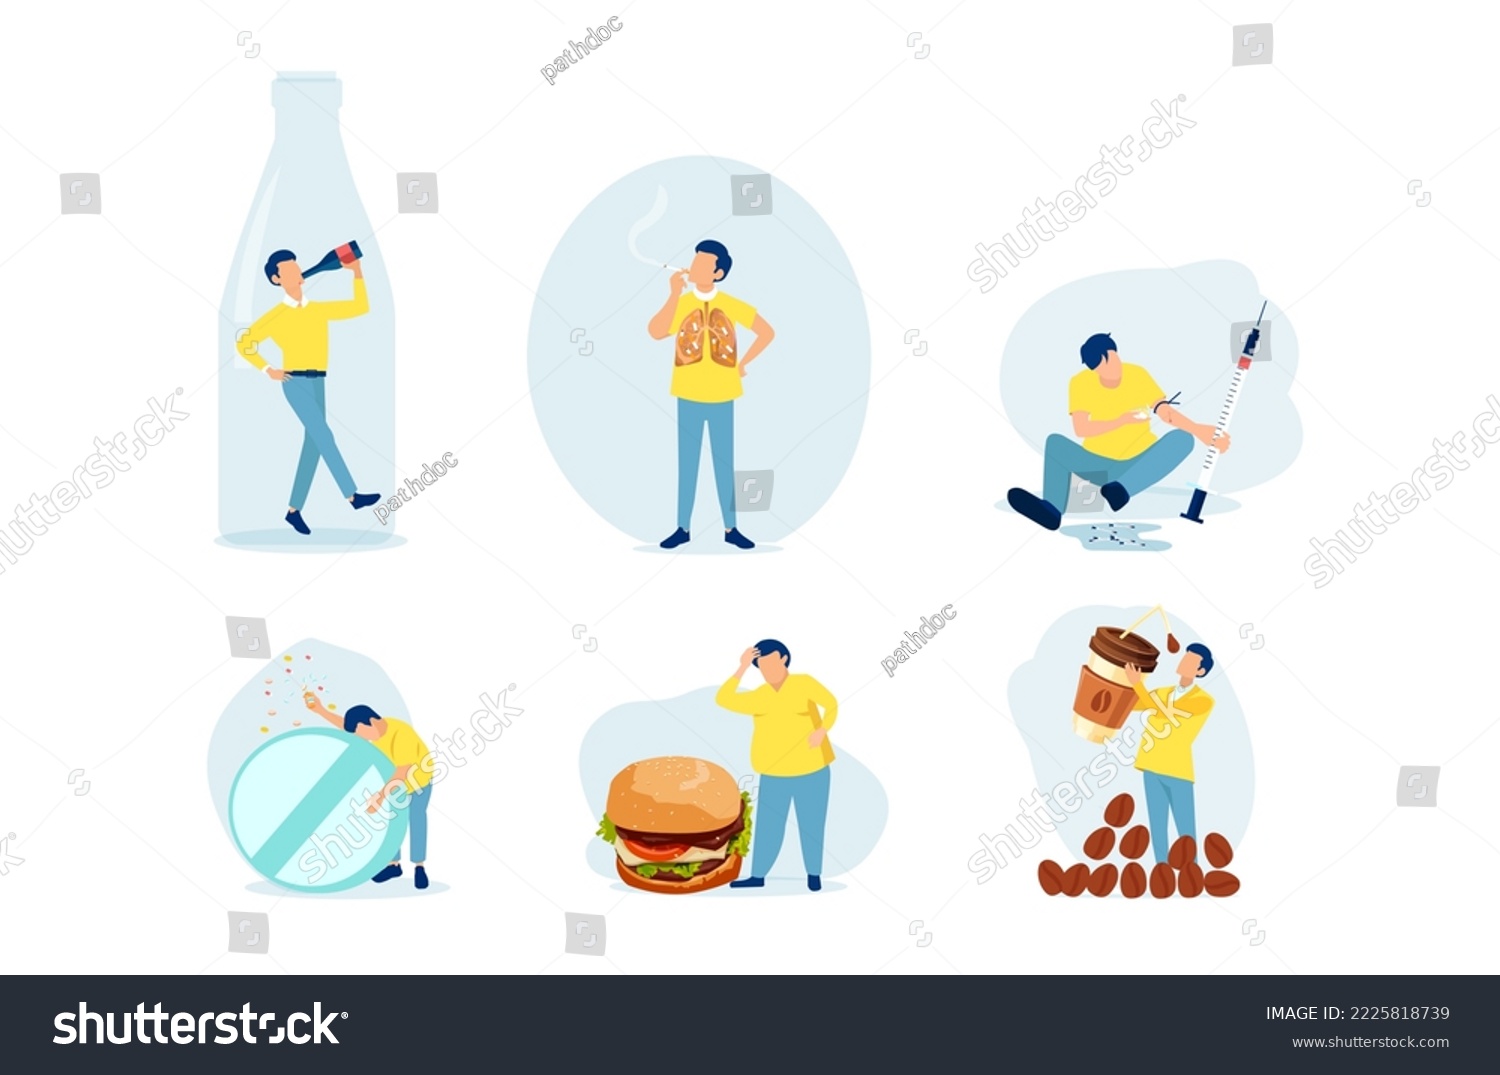 SVG of Vector of a young man with bad habits alcoholism, drug addiction, smoking, coffeemania, gluttony wand obesity  svg